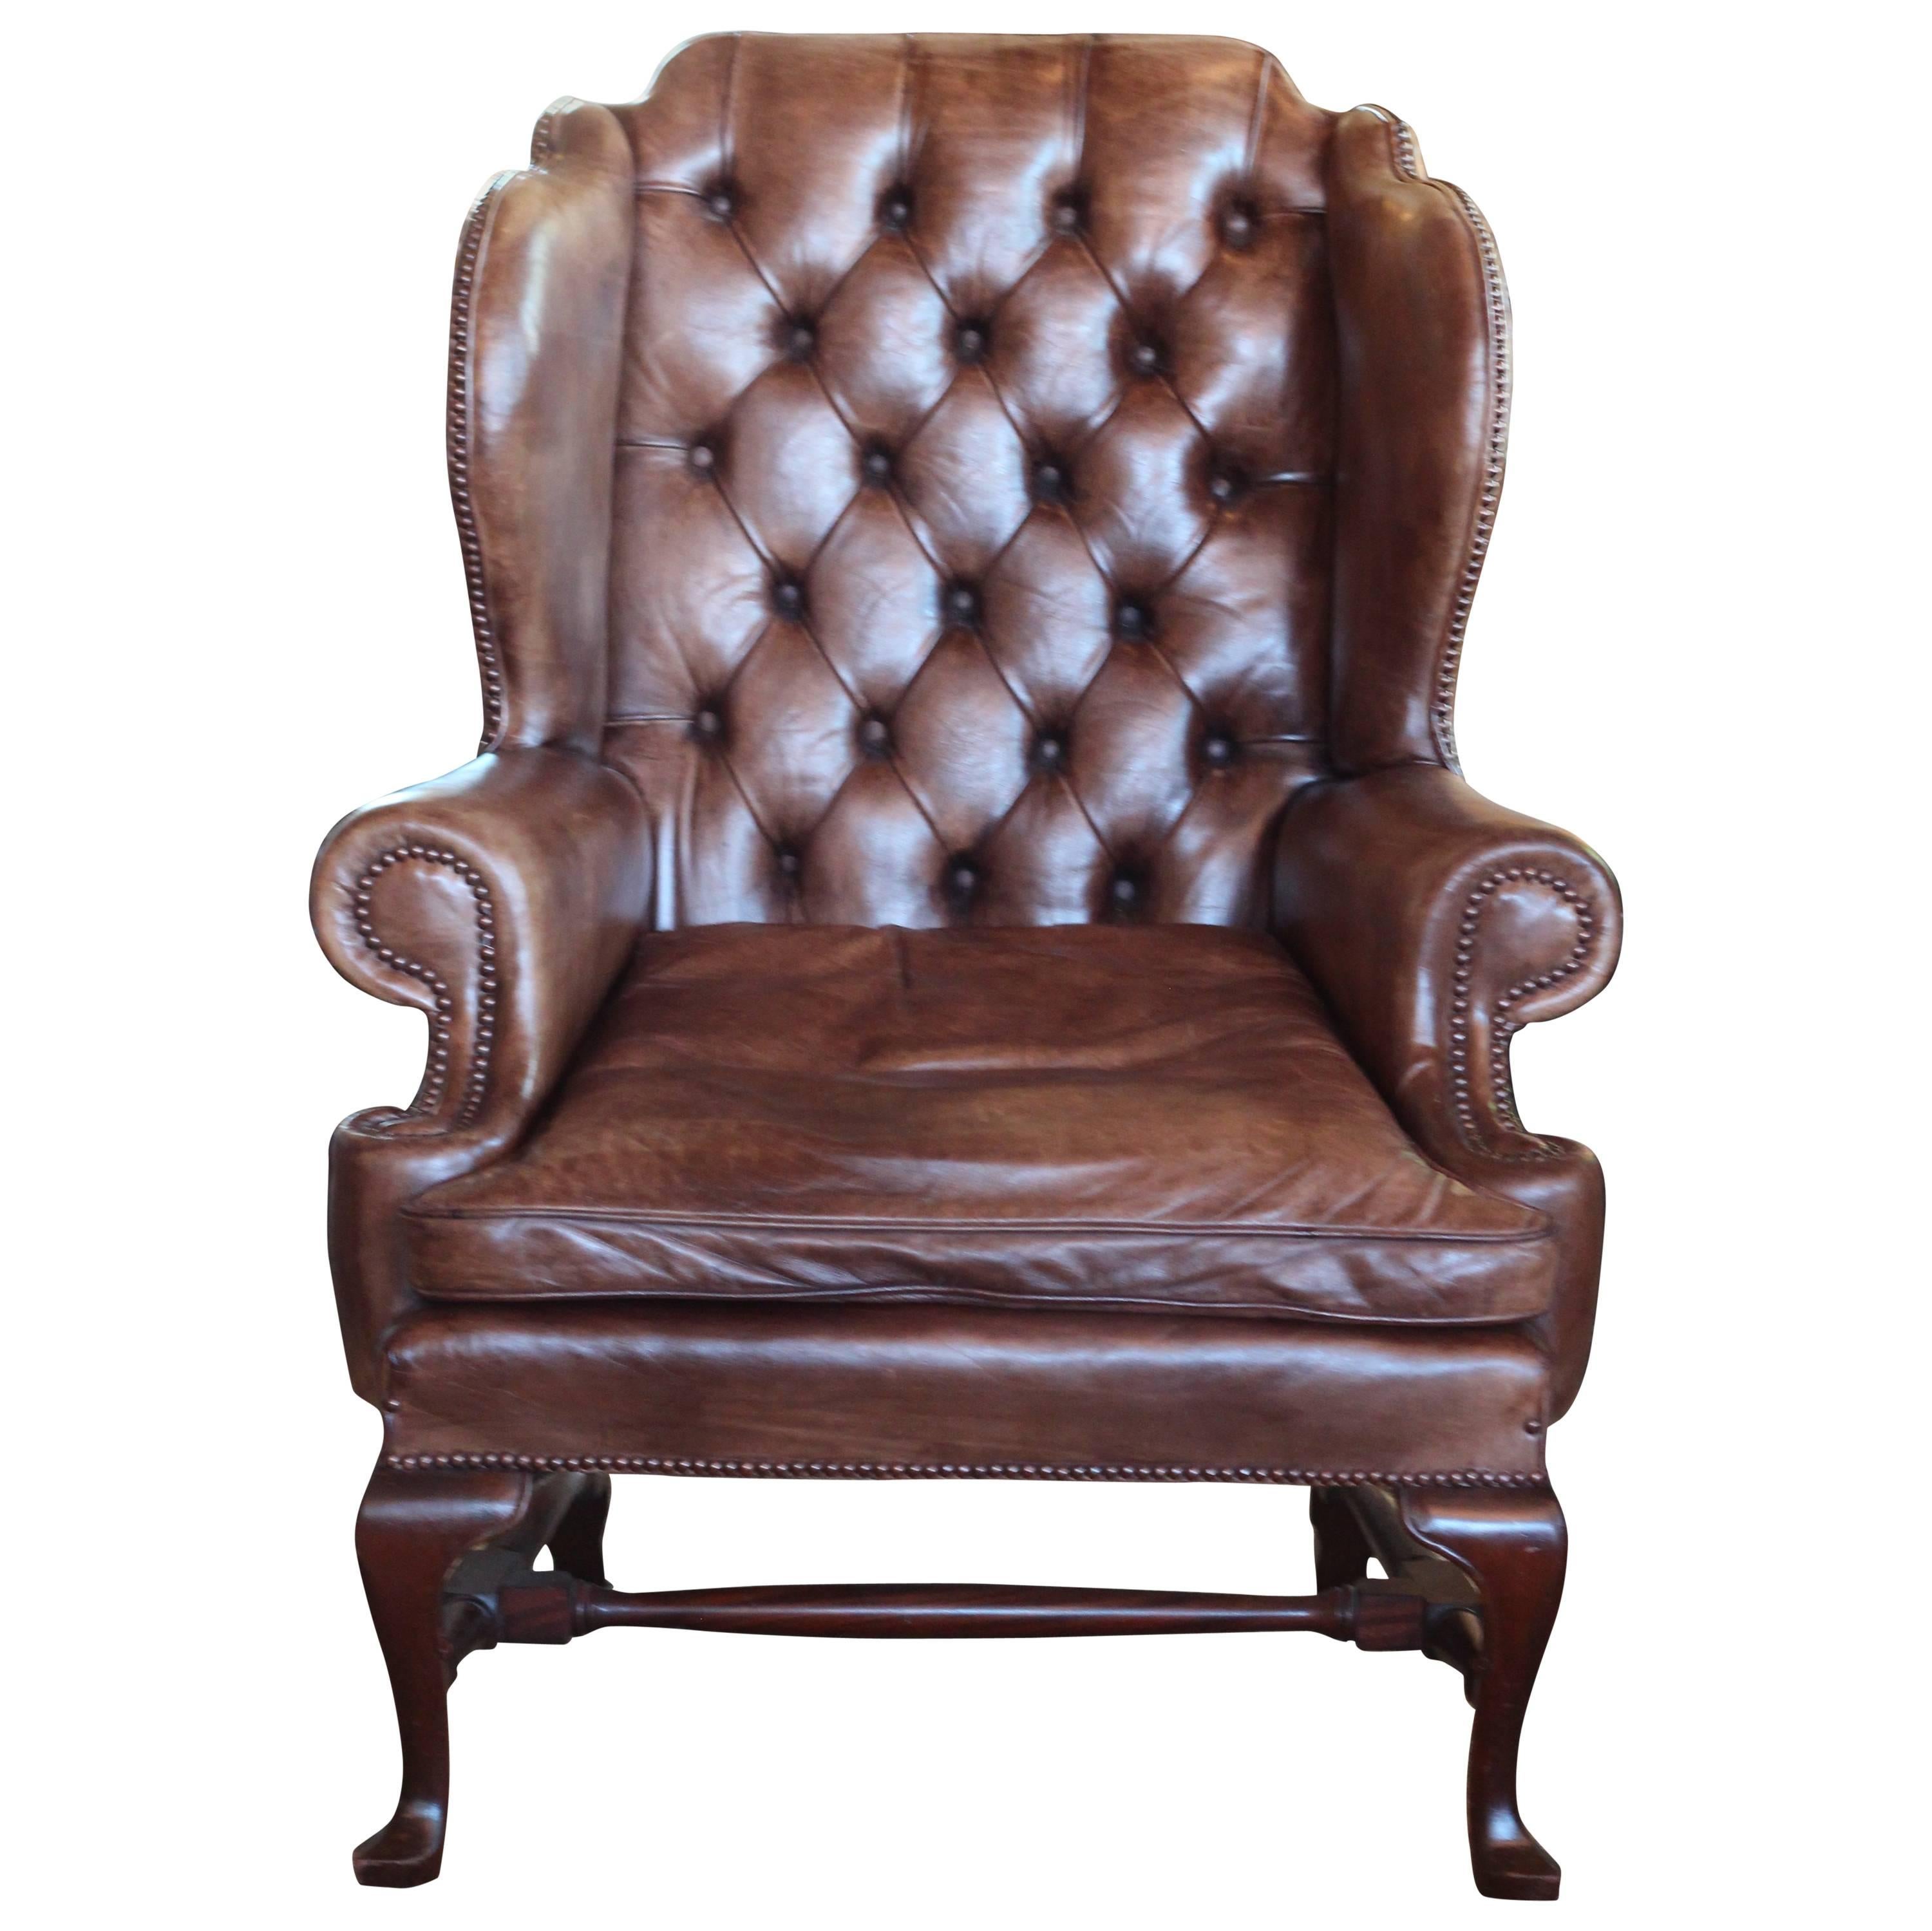 Early 20th Century English Leather Wing Chair For Sale